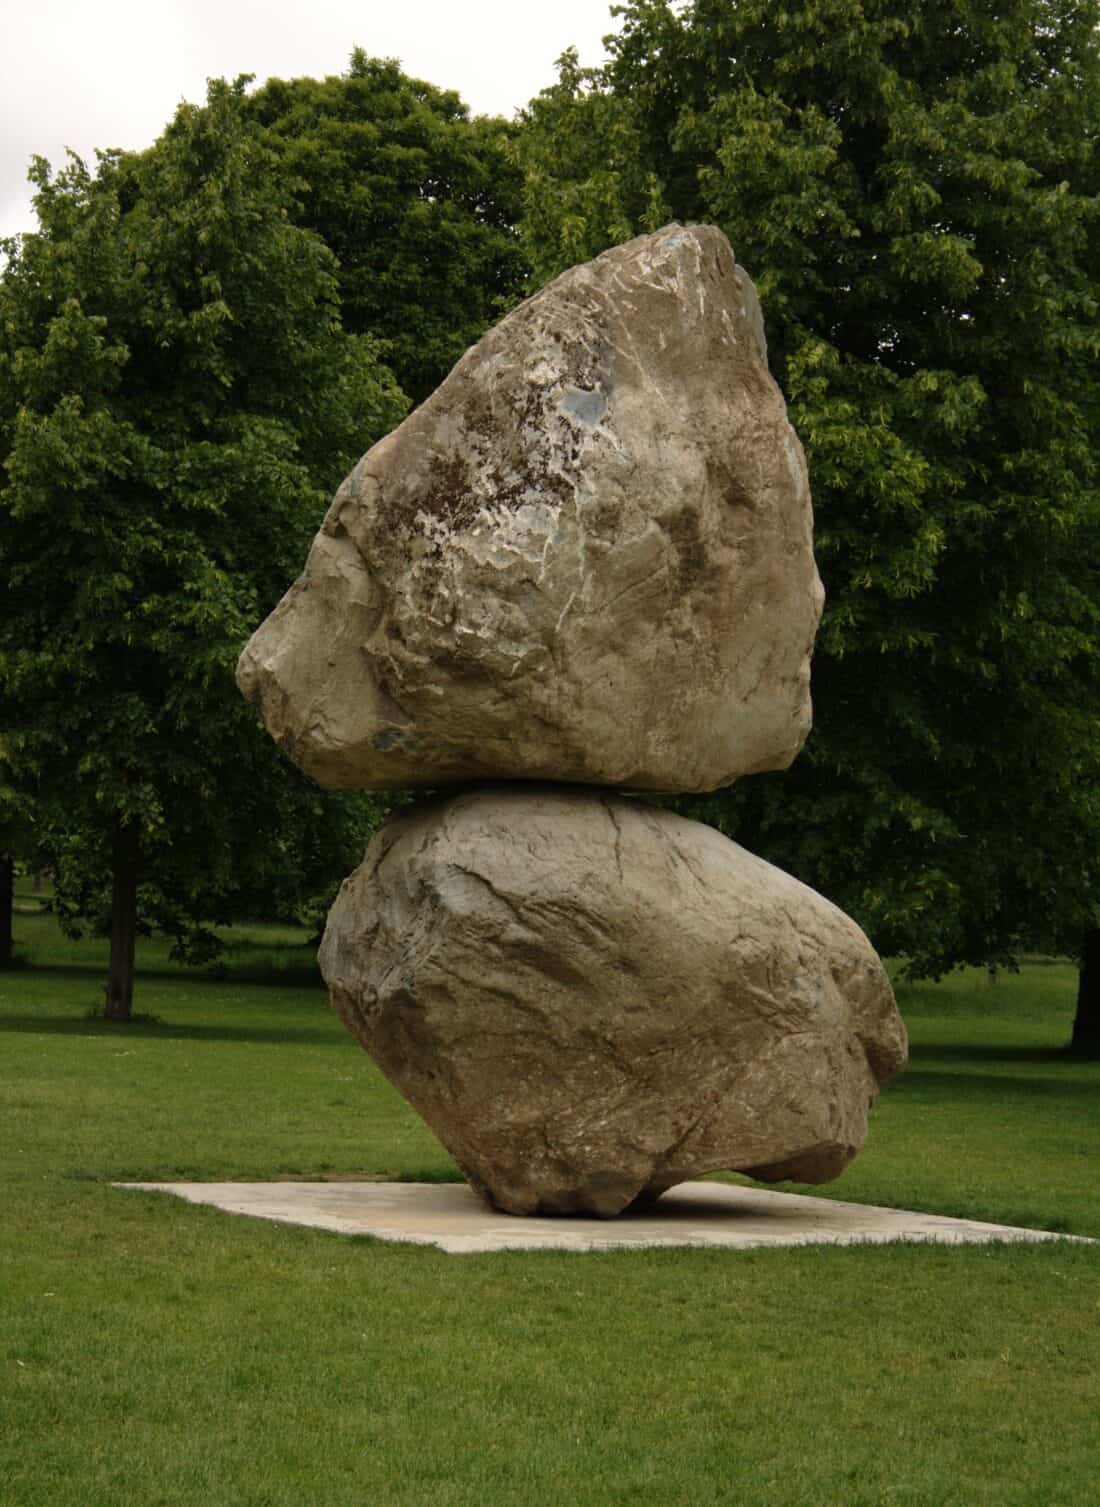 A large rock in the middle of a grassy field.